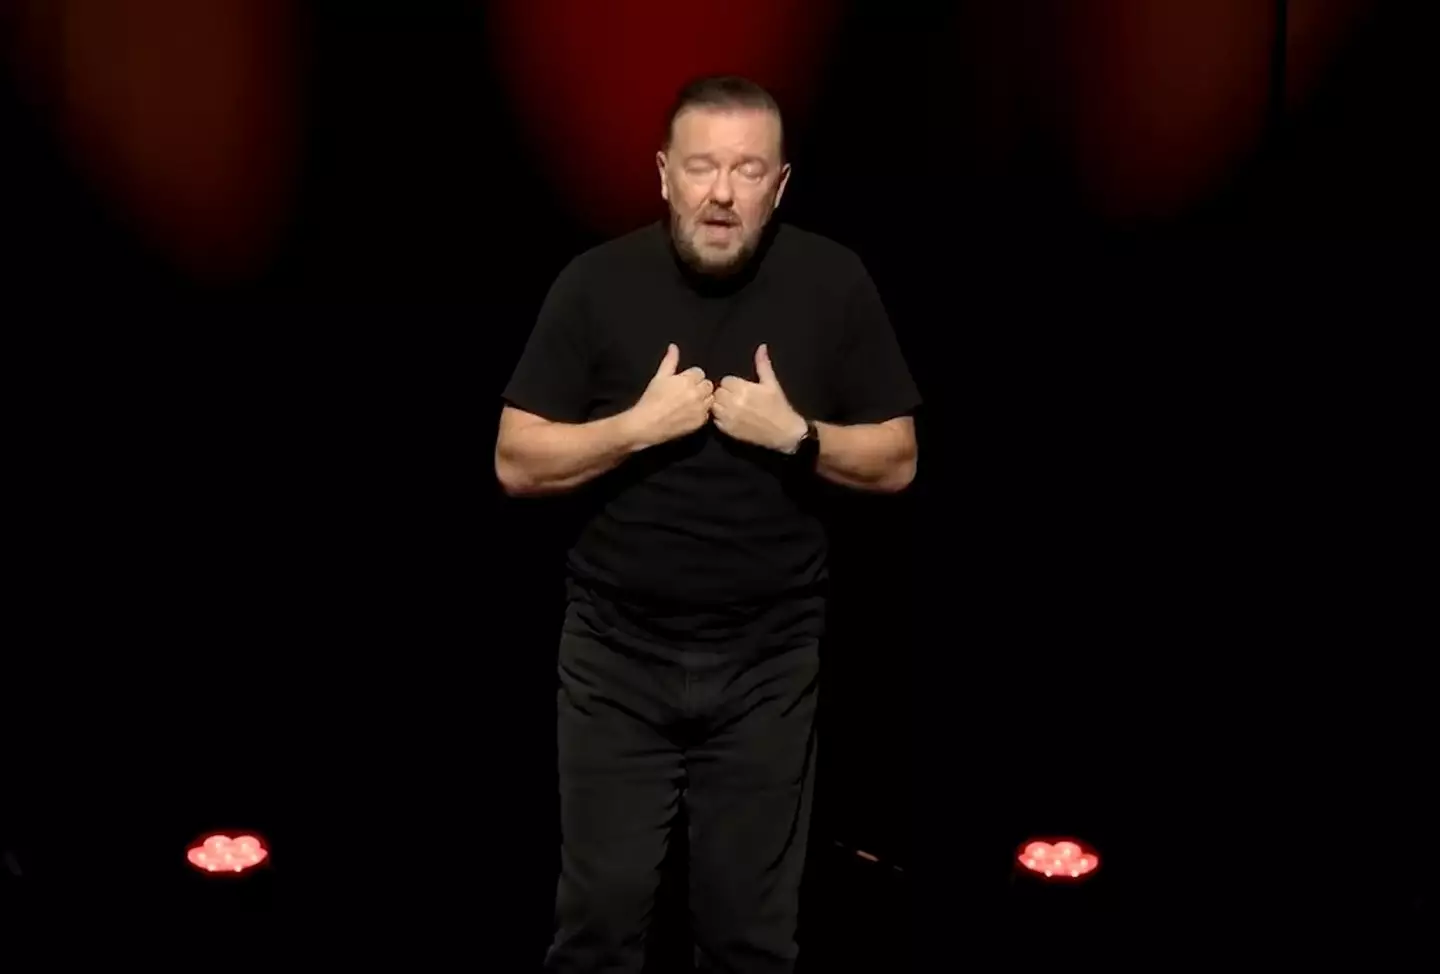 Ricky Gervais has his new special out now on Netflix.